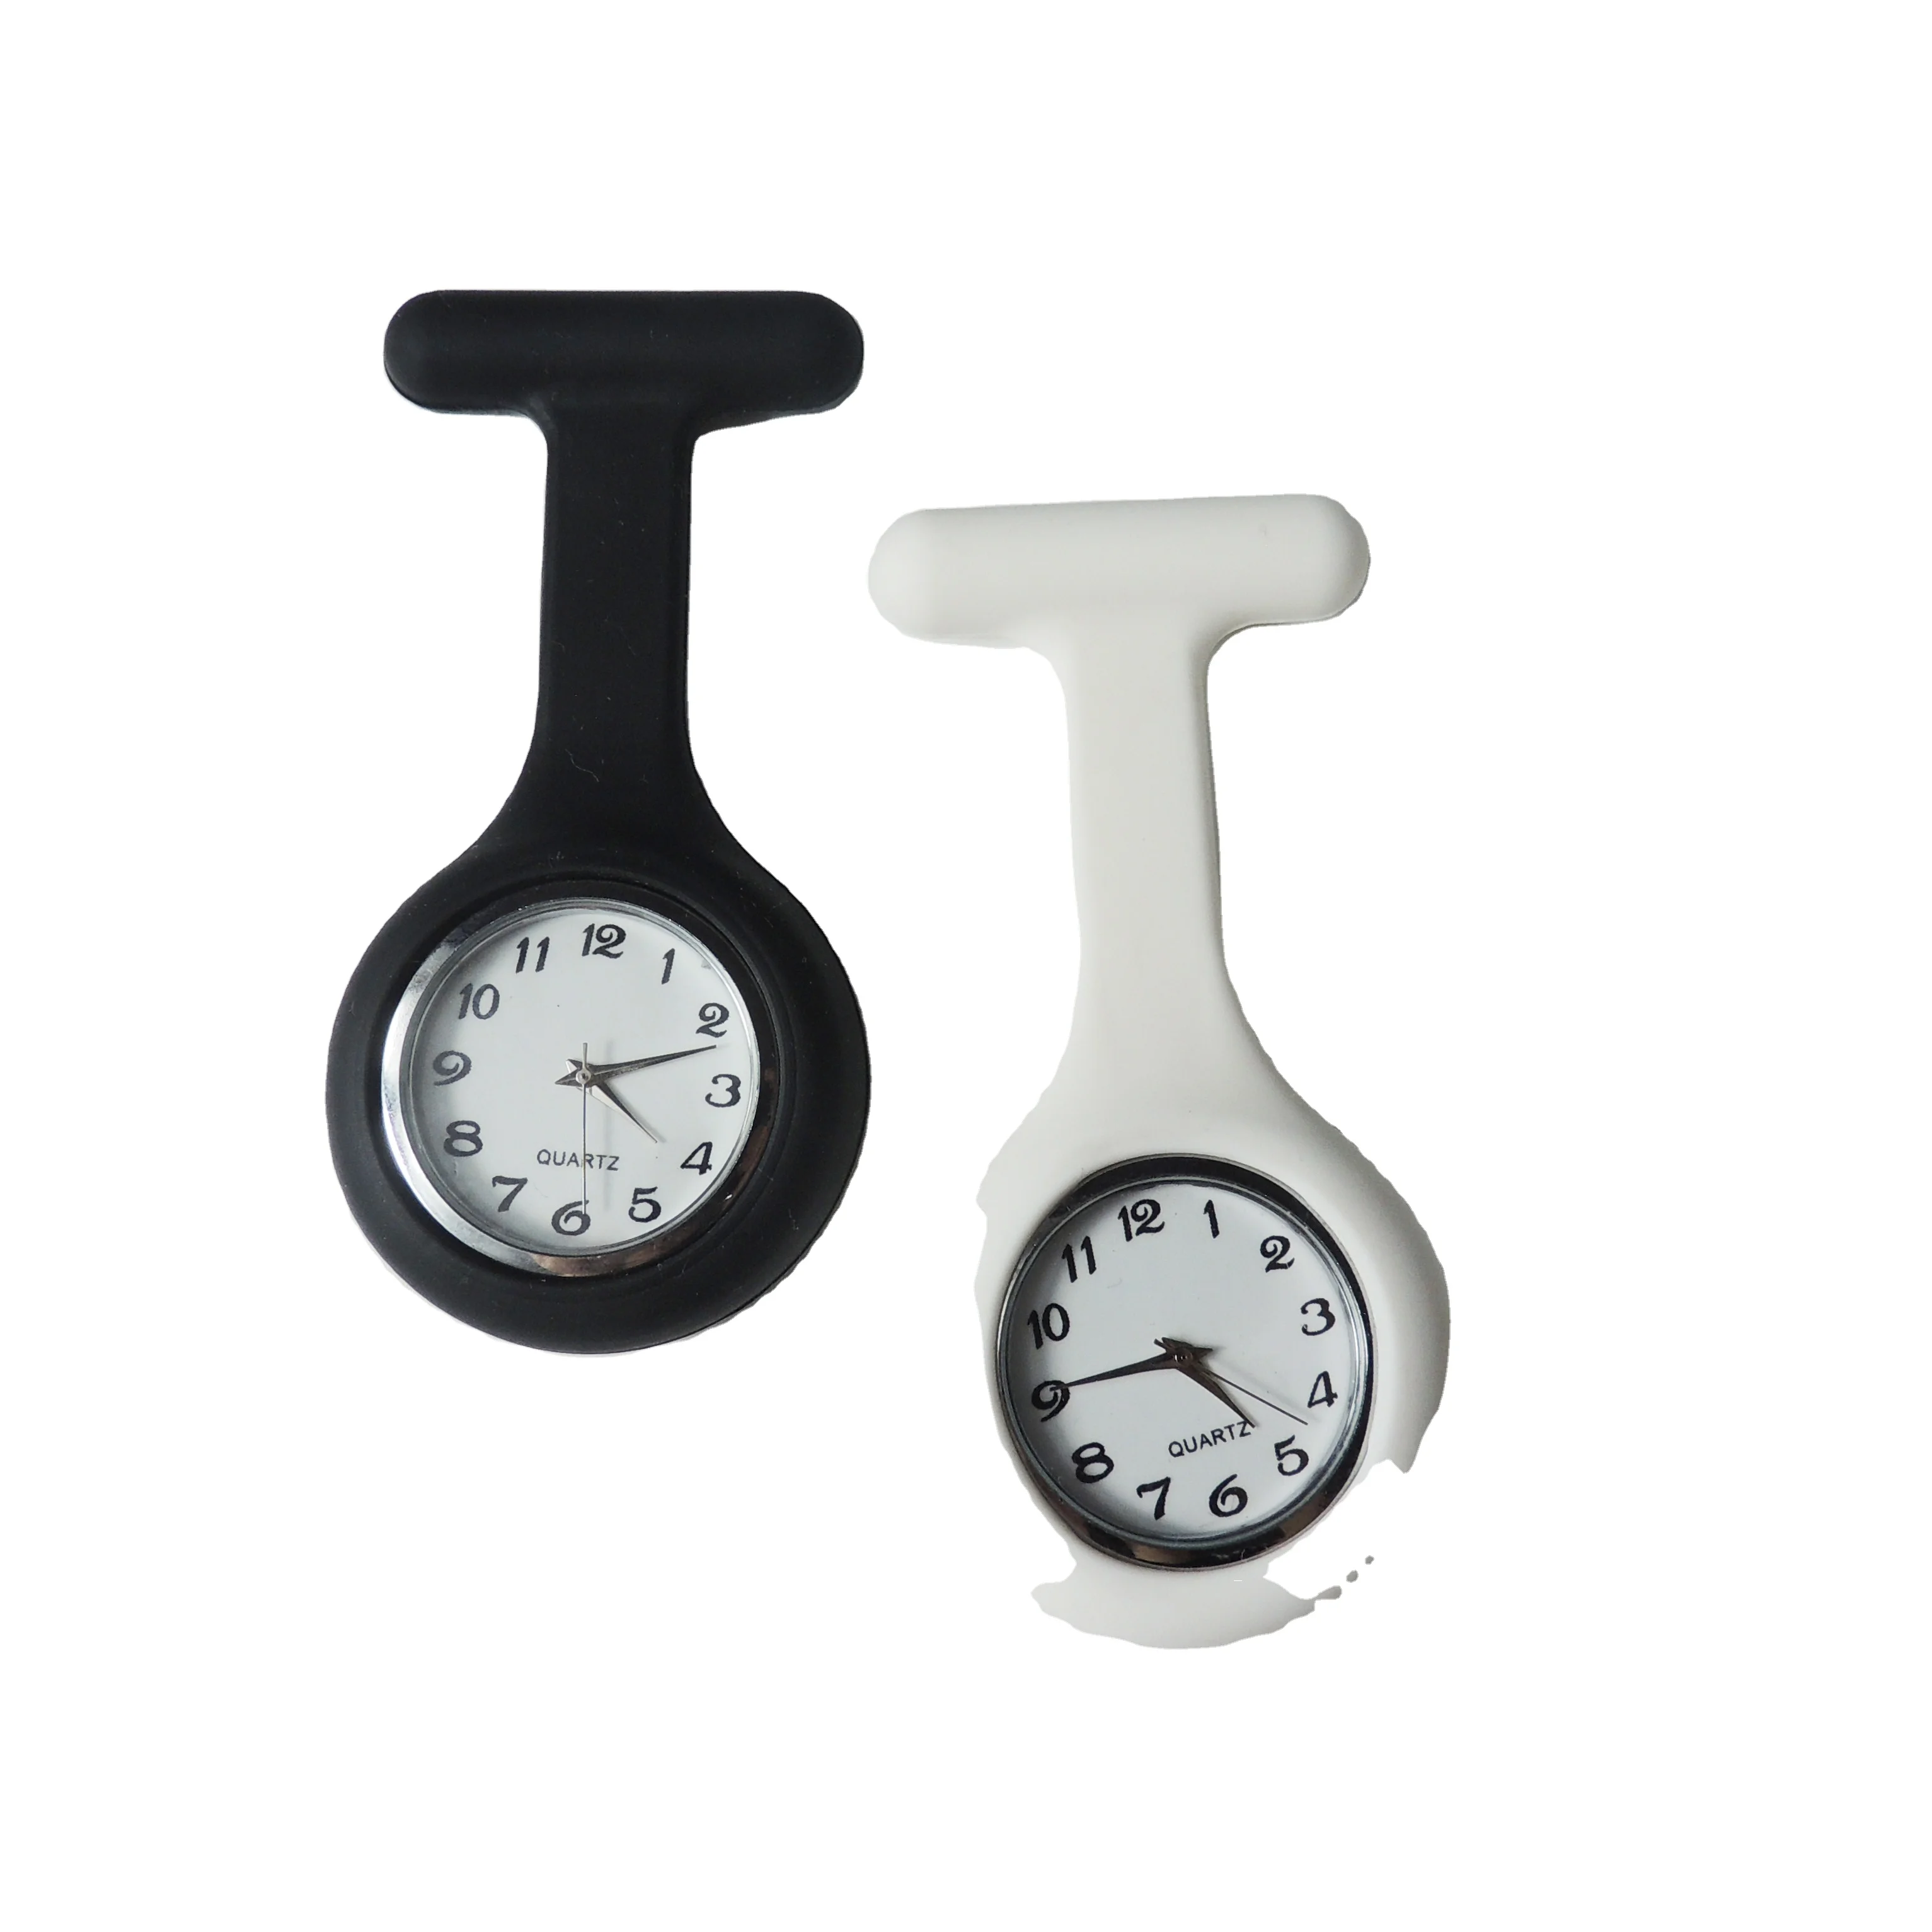 2021 hot sell custom medical silicone nurse doctor watch caregiver watches for hospital worker